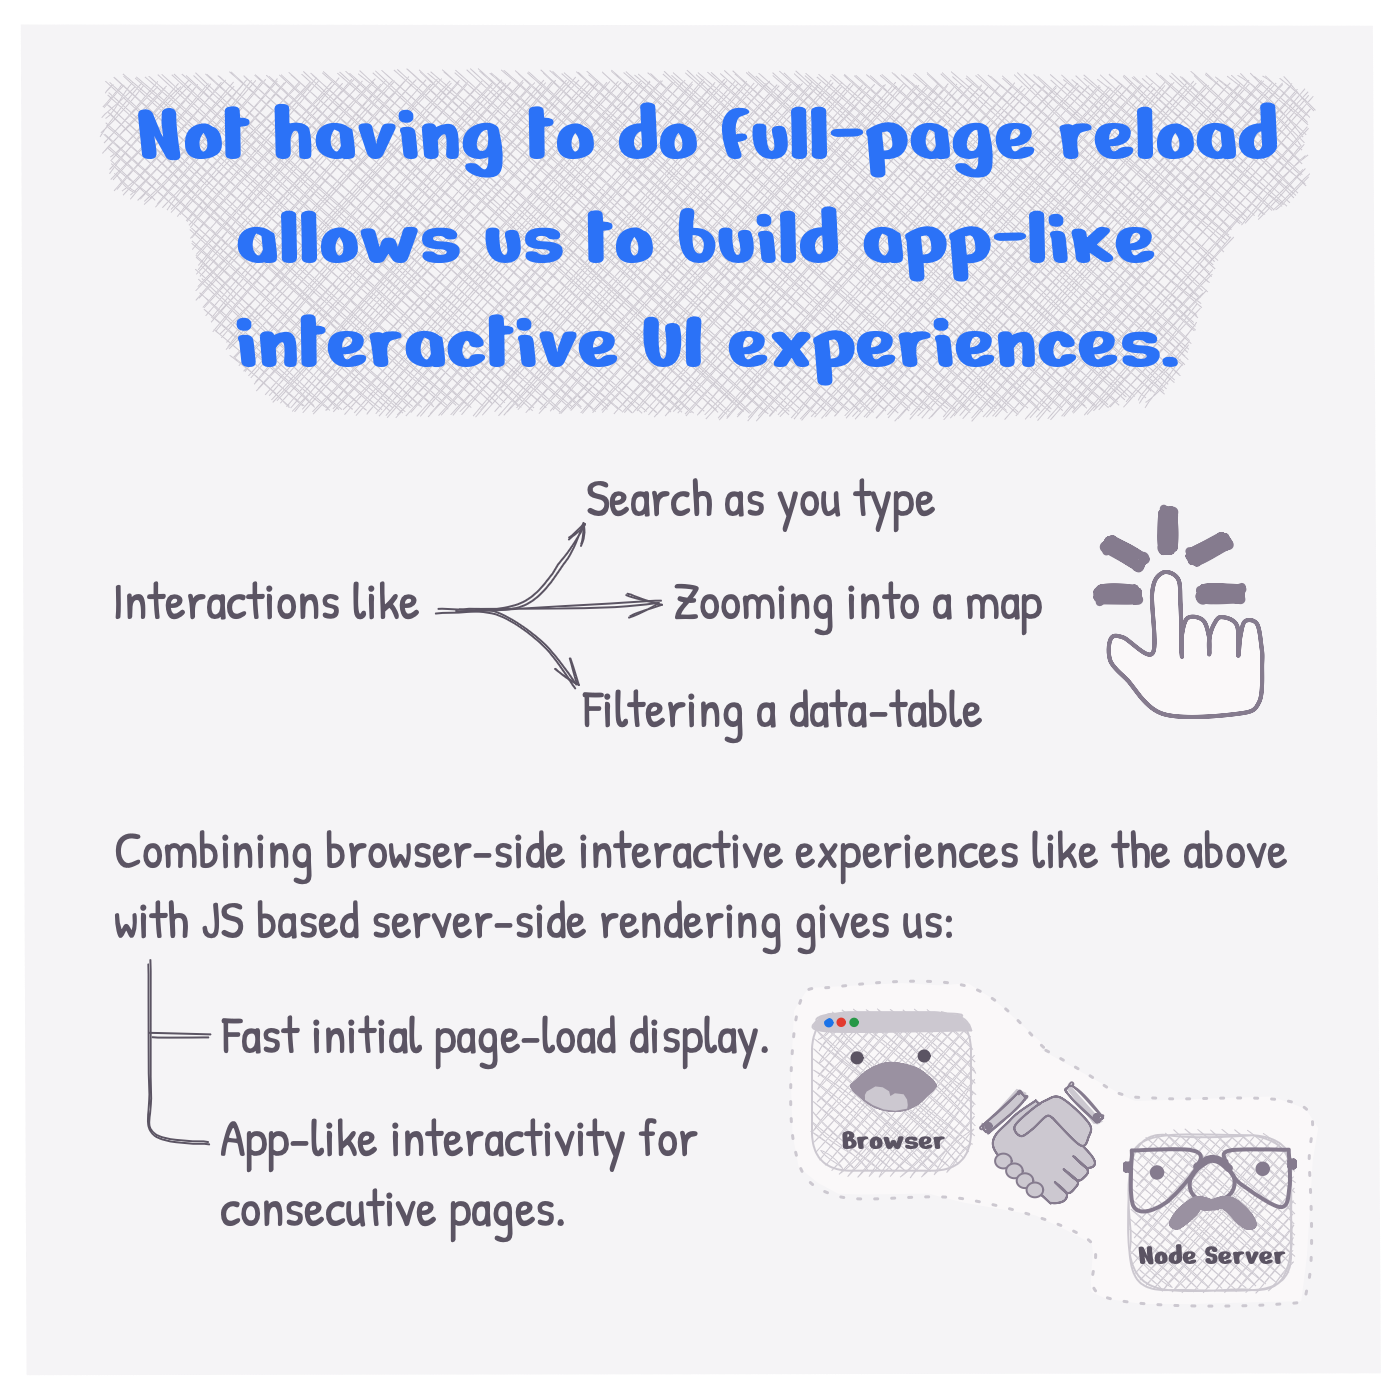 Not having to do full-page reload allows us to build app-like interactive UI experiences